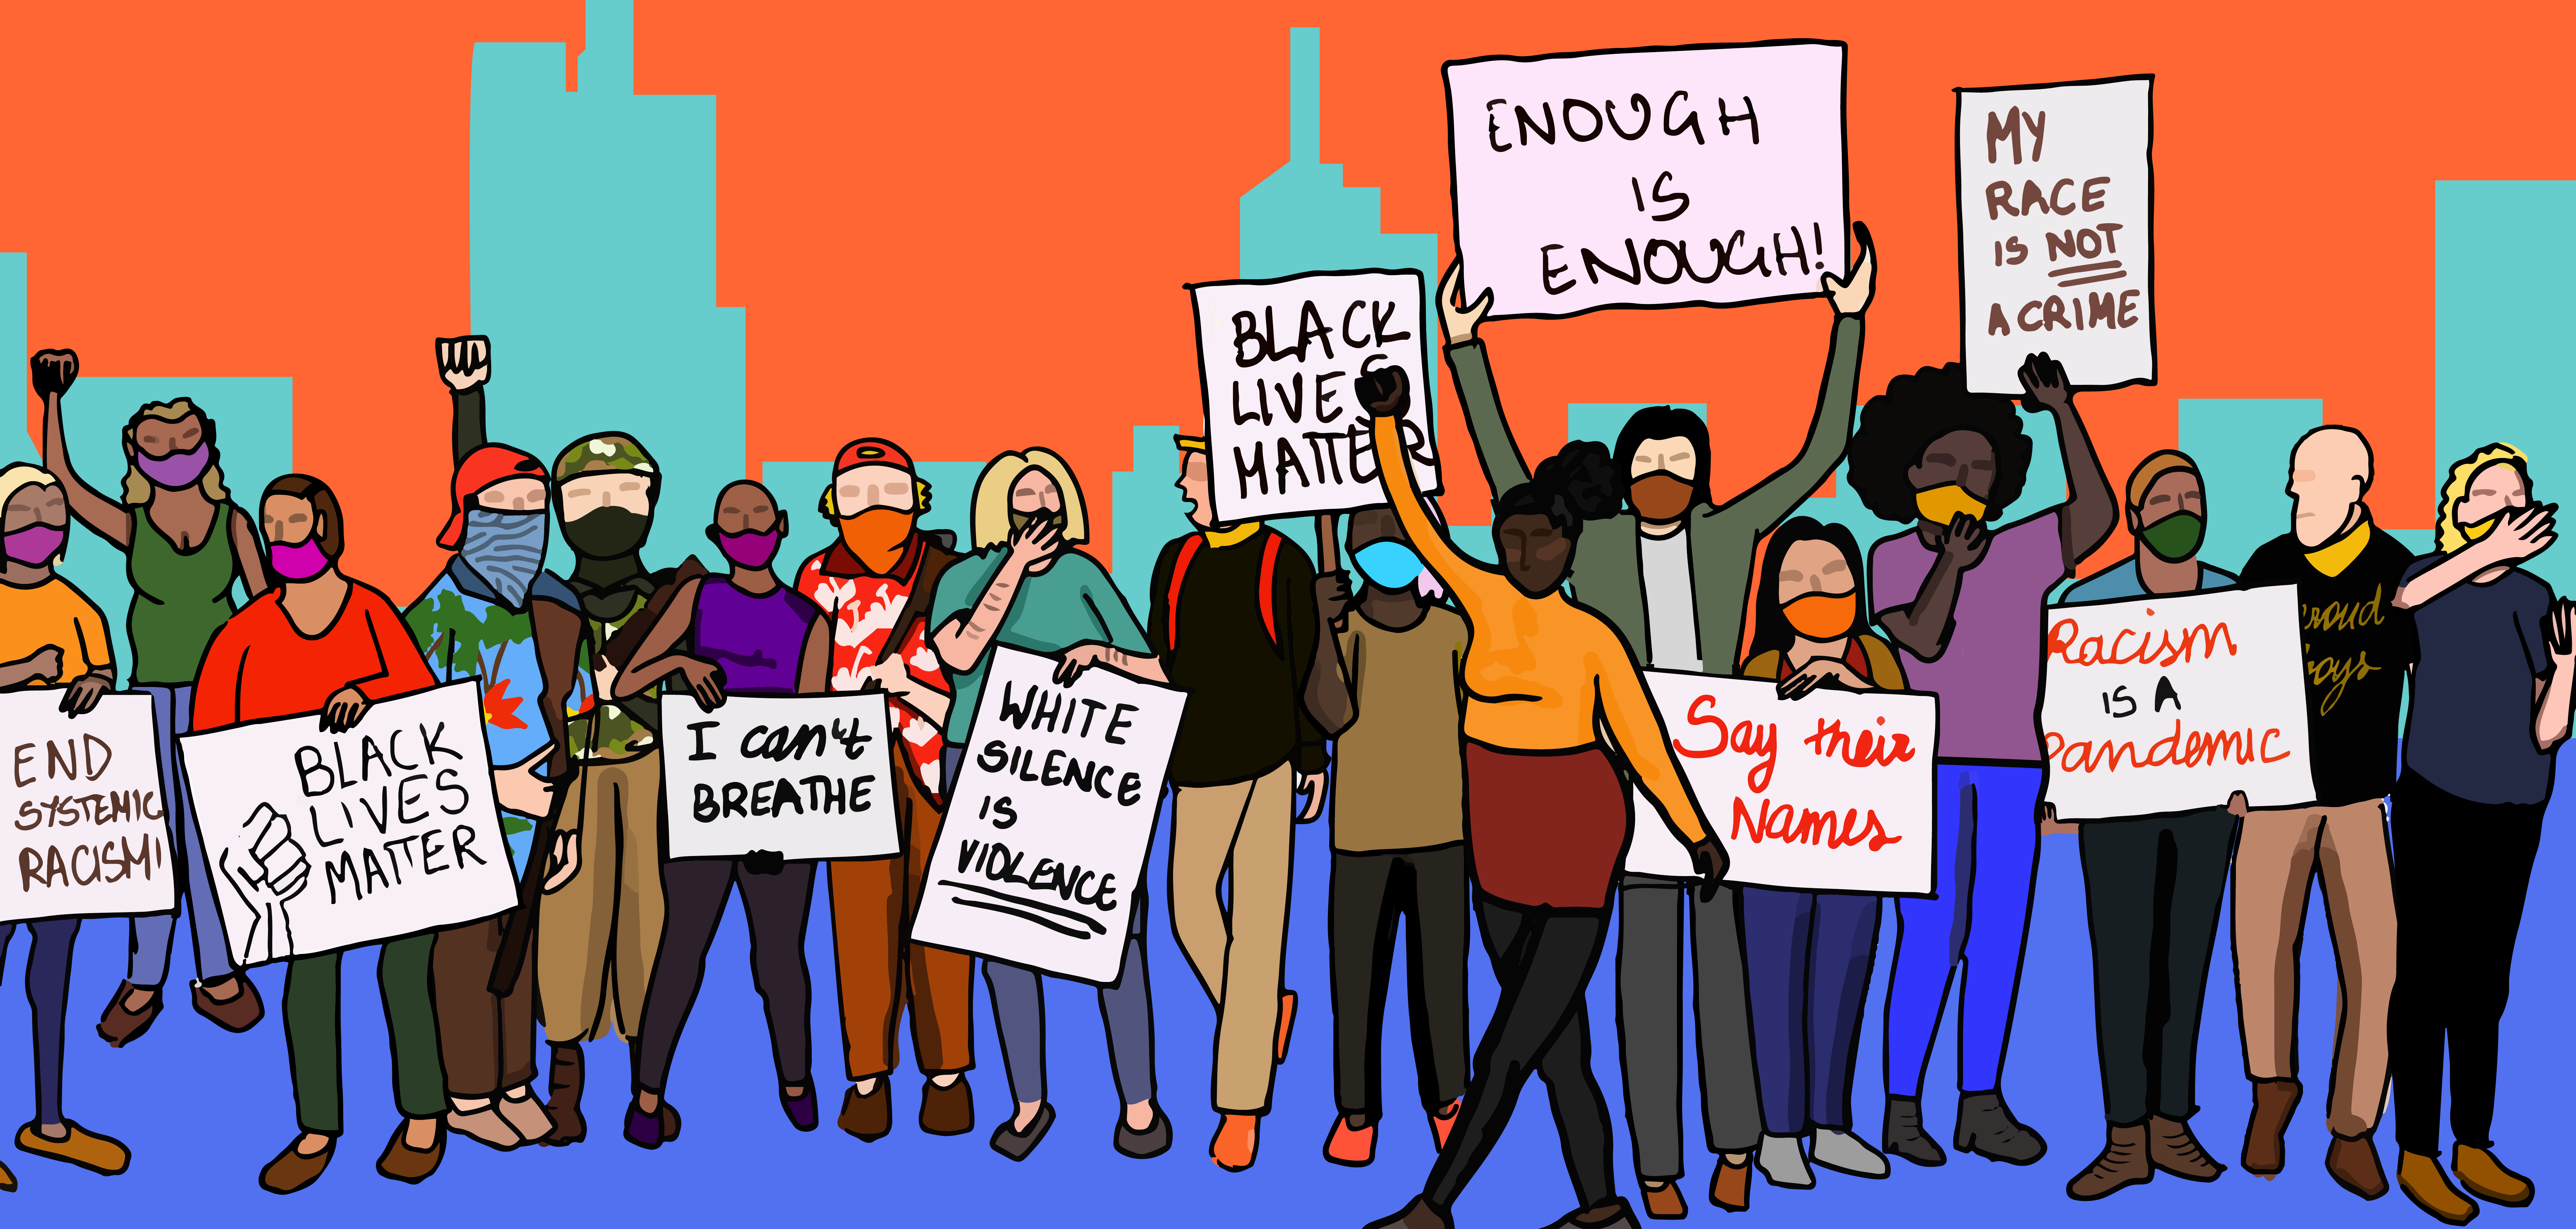 A group of protesters illustrated.